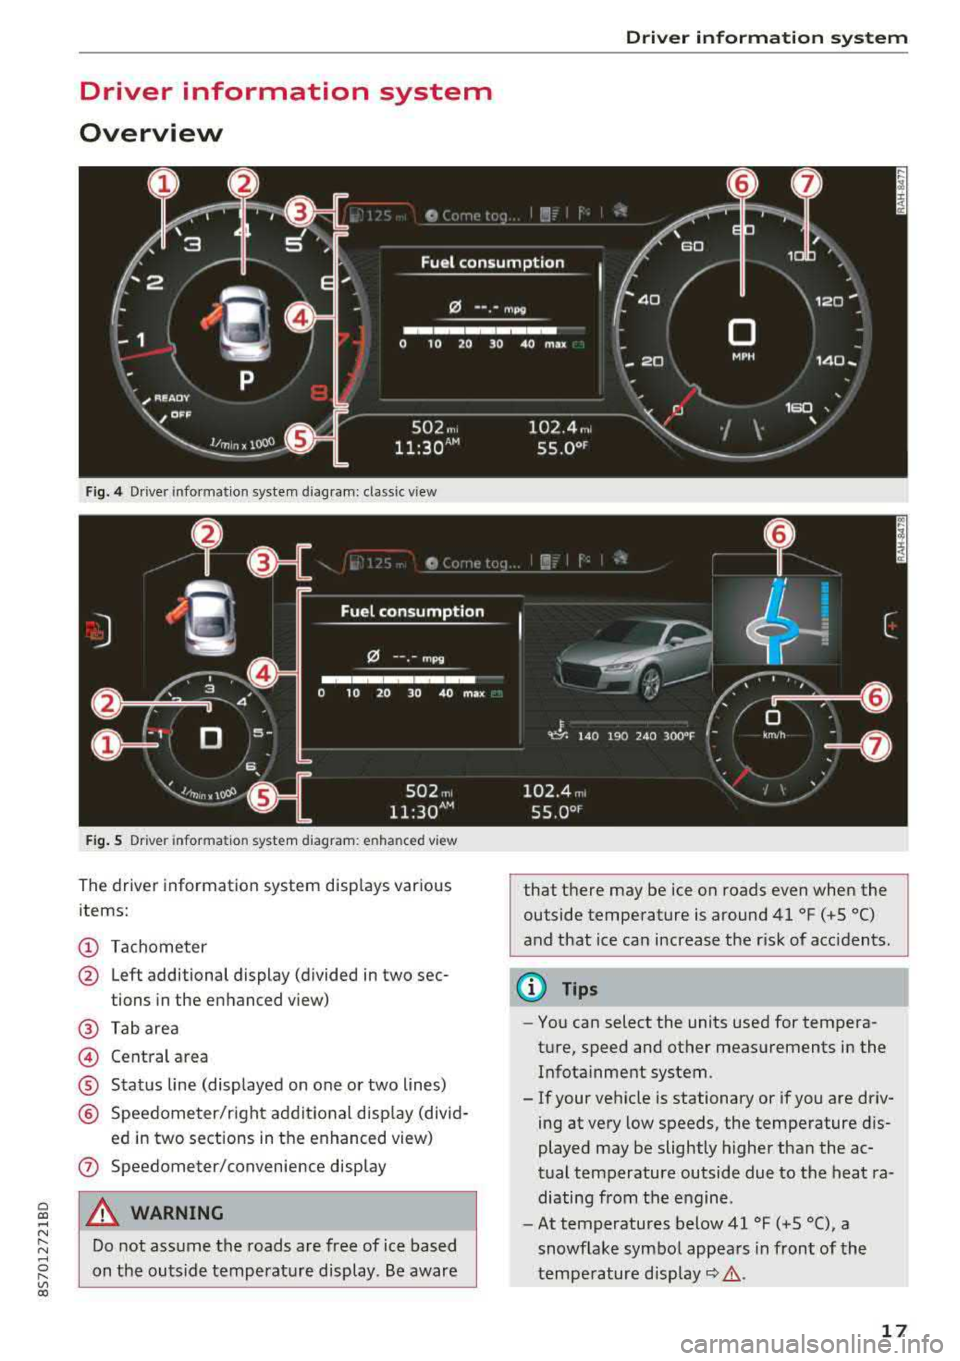 AUDI TT ROADSTER 2018  Owners Manual Cl co .... N ,-... N ...... 0 ,-... Vl co 
Driver  information  system 
Overview 
Fig.  4 Driver  information  system  diagram:  classic v iew 
Fig. S D rive r  in formation  system  diagram : en ha n